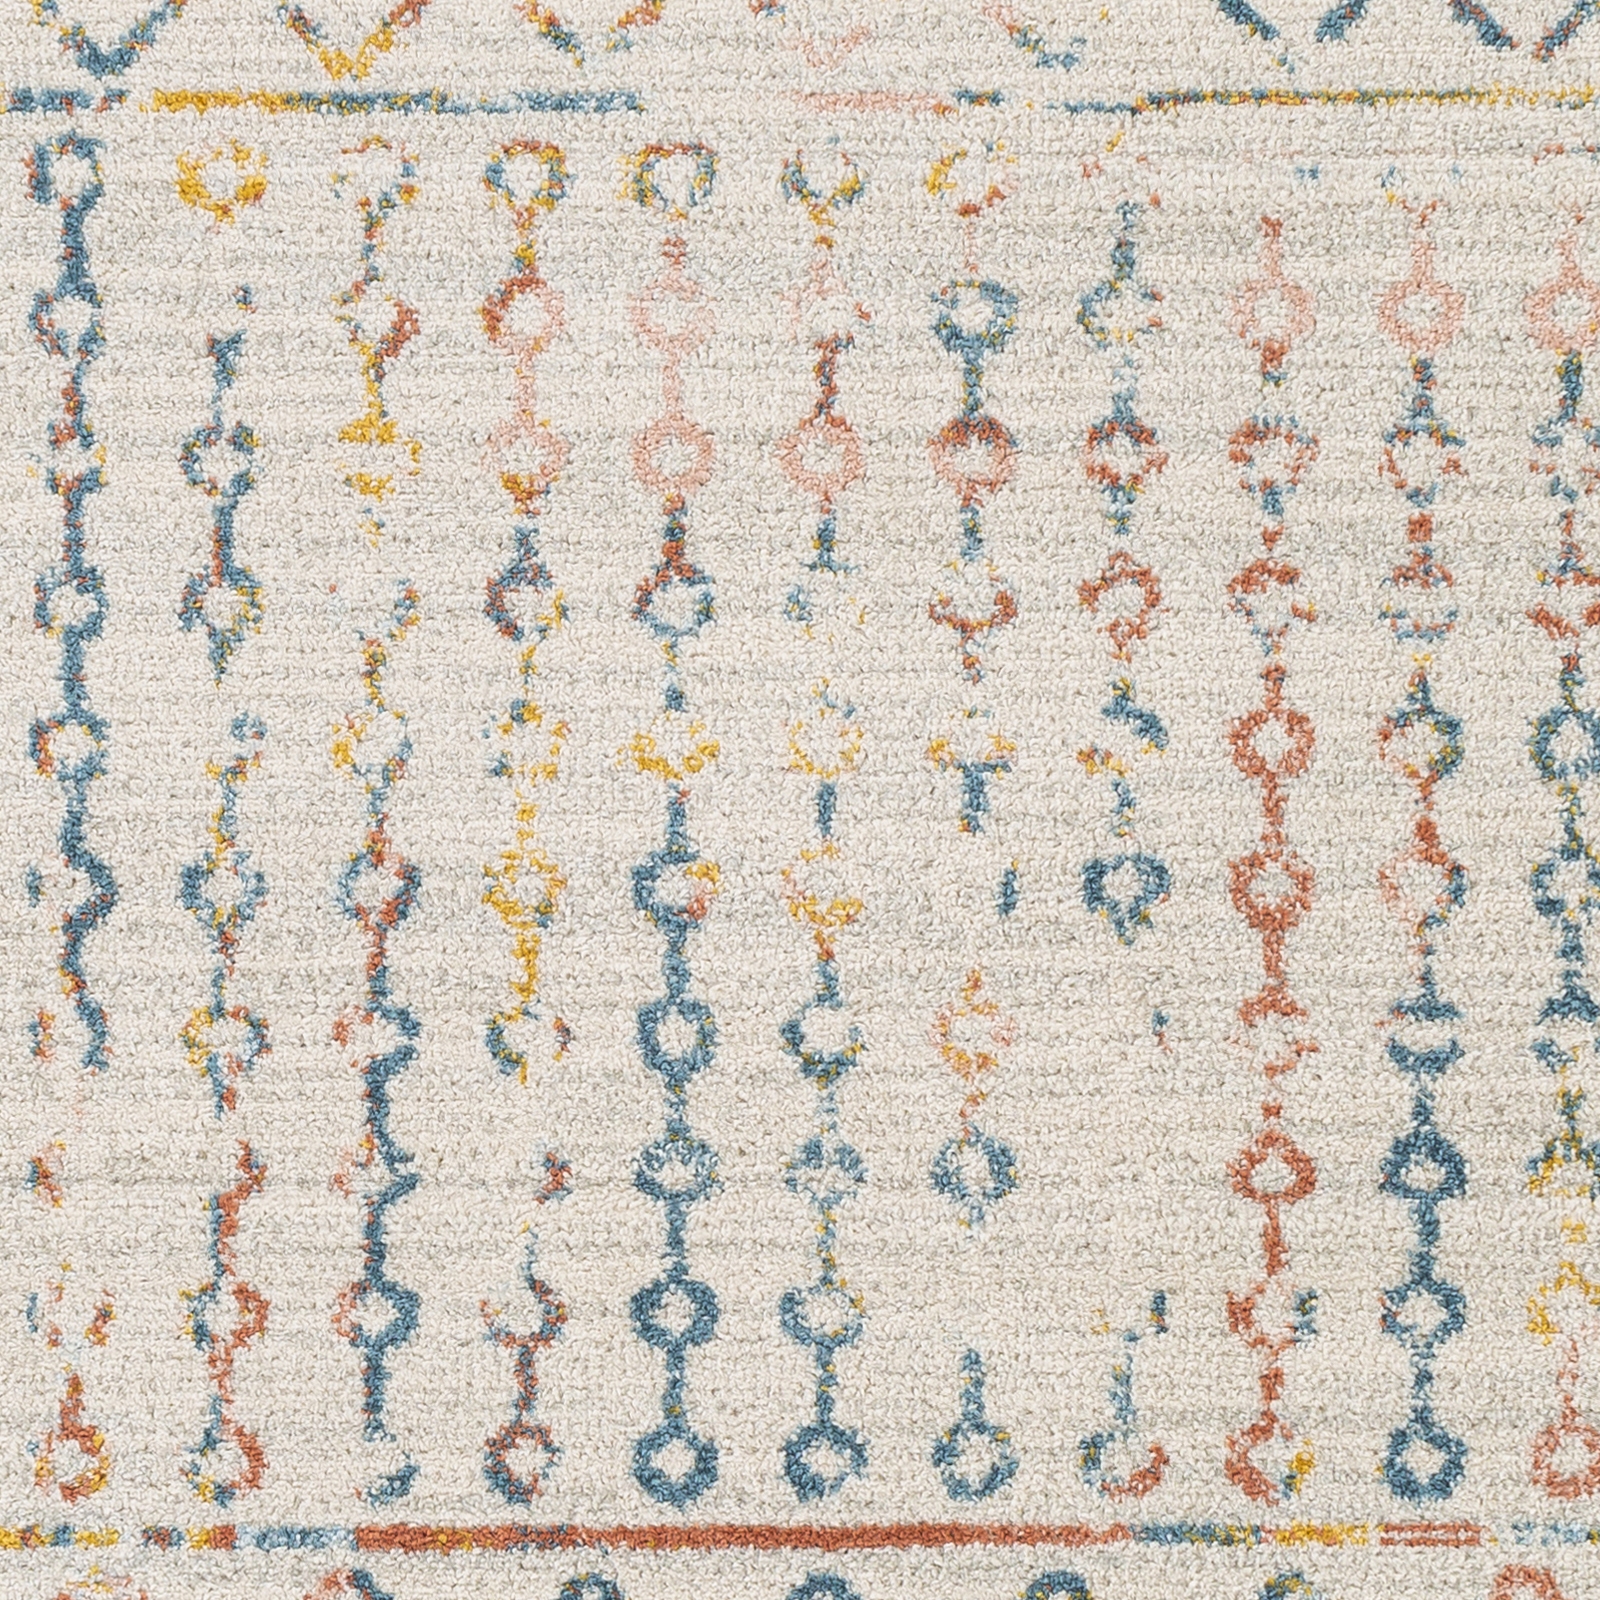 Chester Rug, 5'3" x 7'3" - Image 5